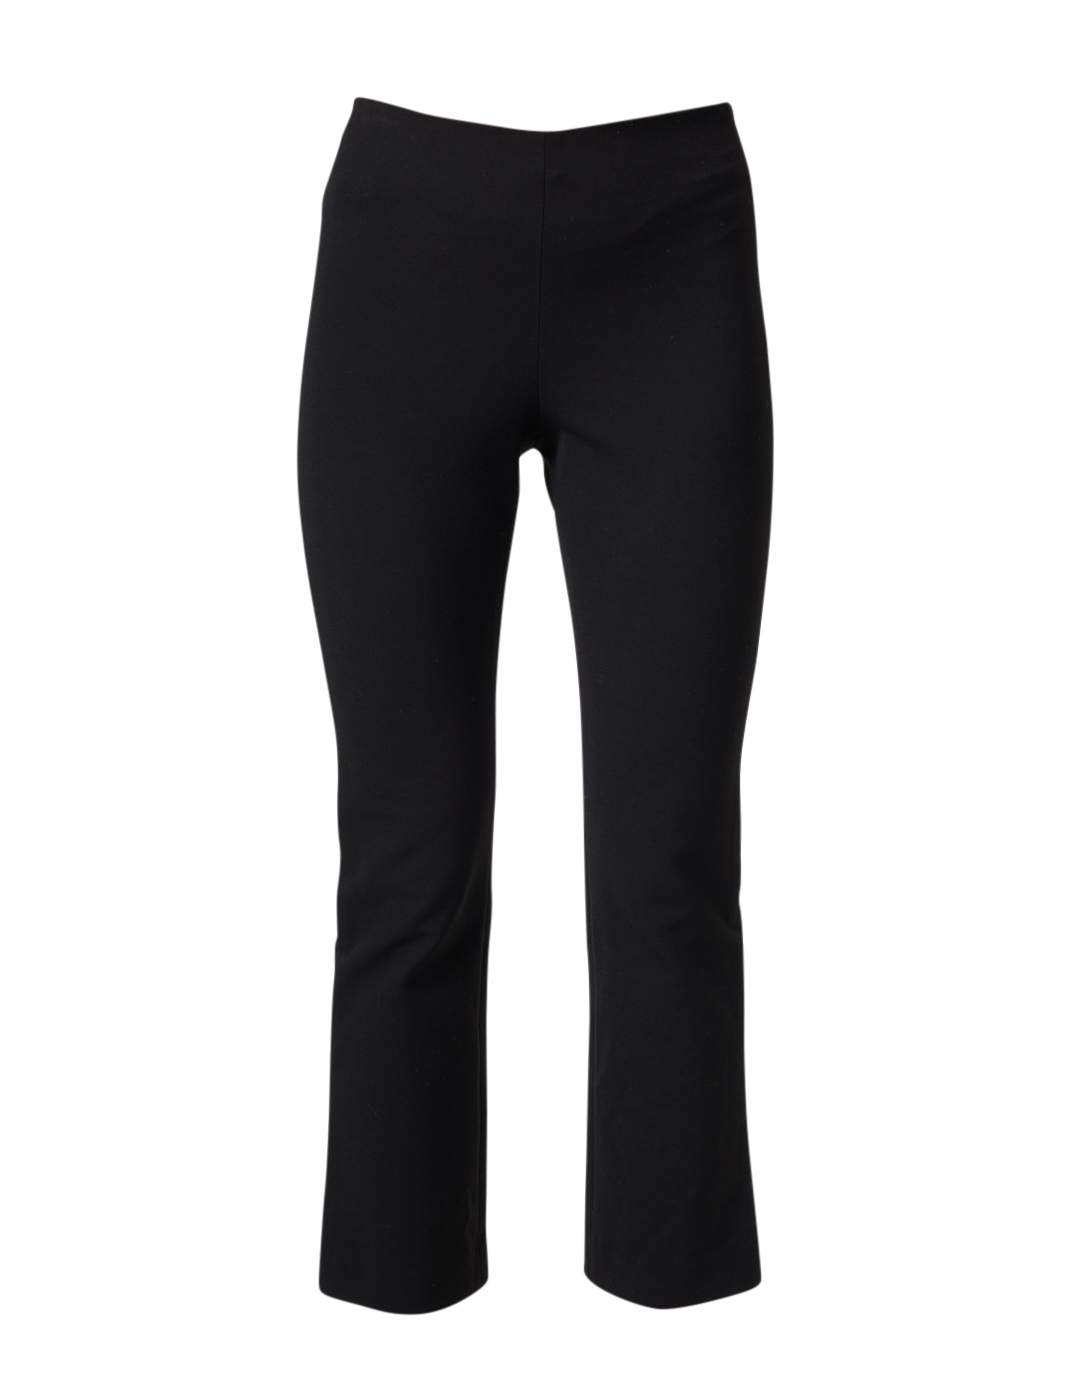 A New Day Black High-Rise Slim Fit Bi-Stretch Ankle Pants Size 6